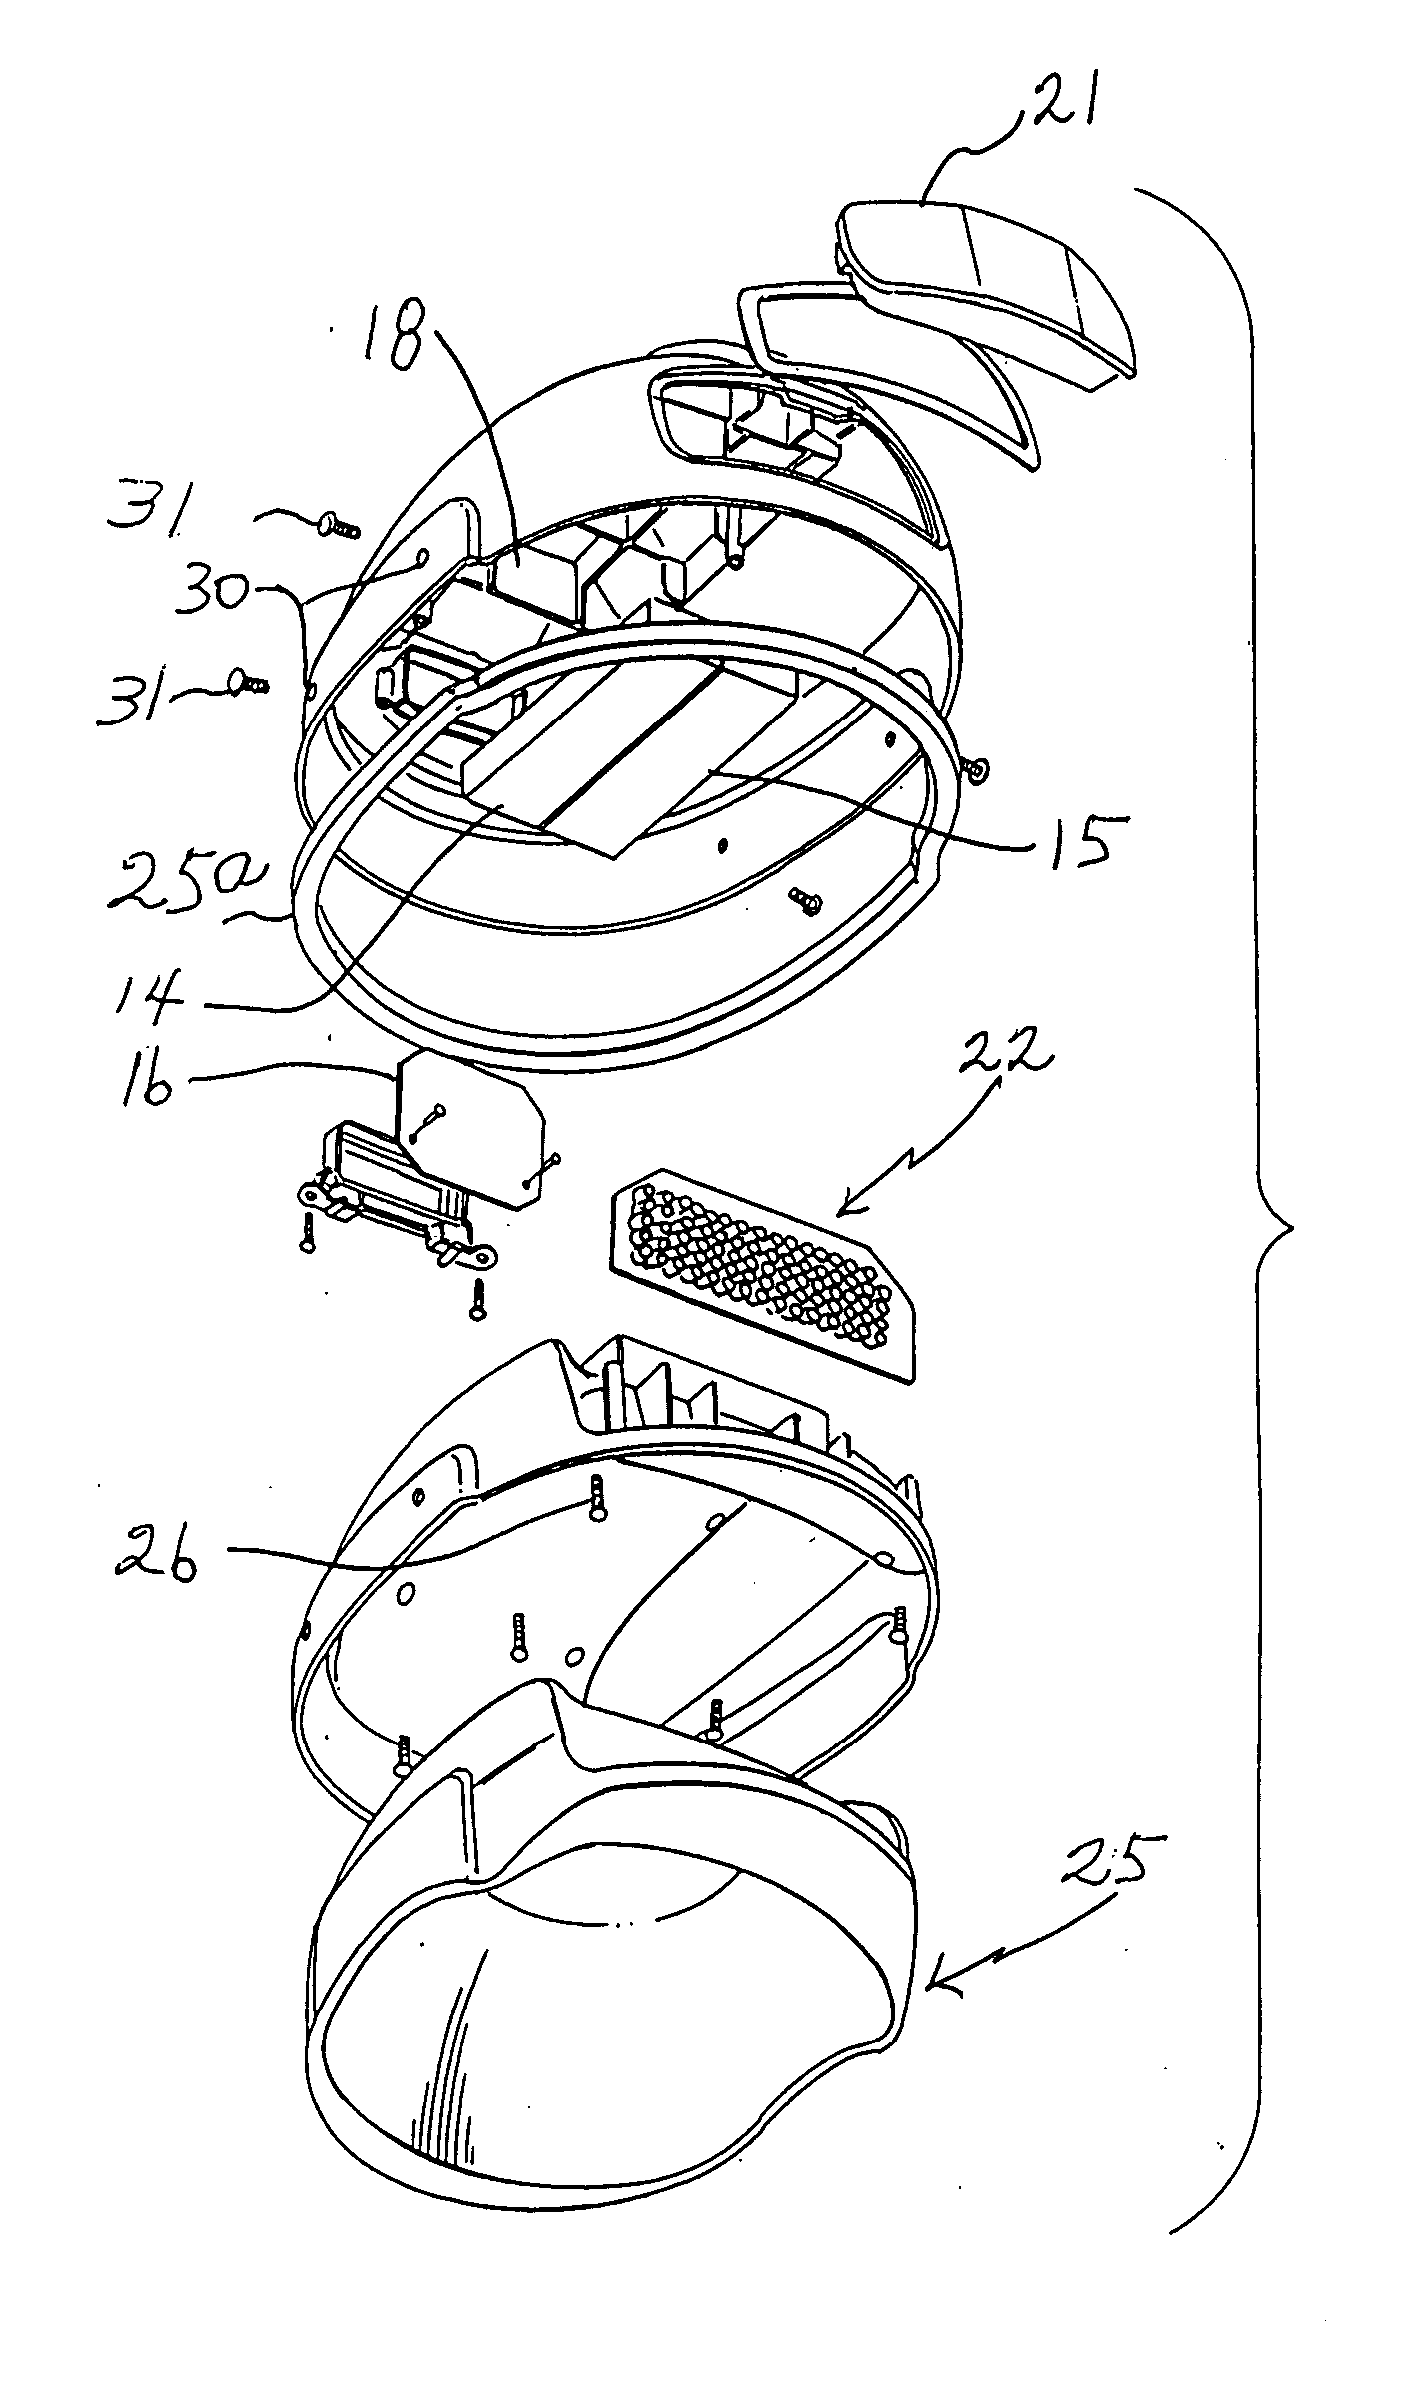 Three-component protective head gear powered by a rechargeable battery